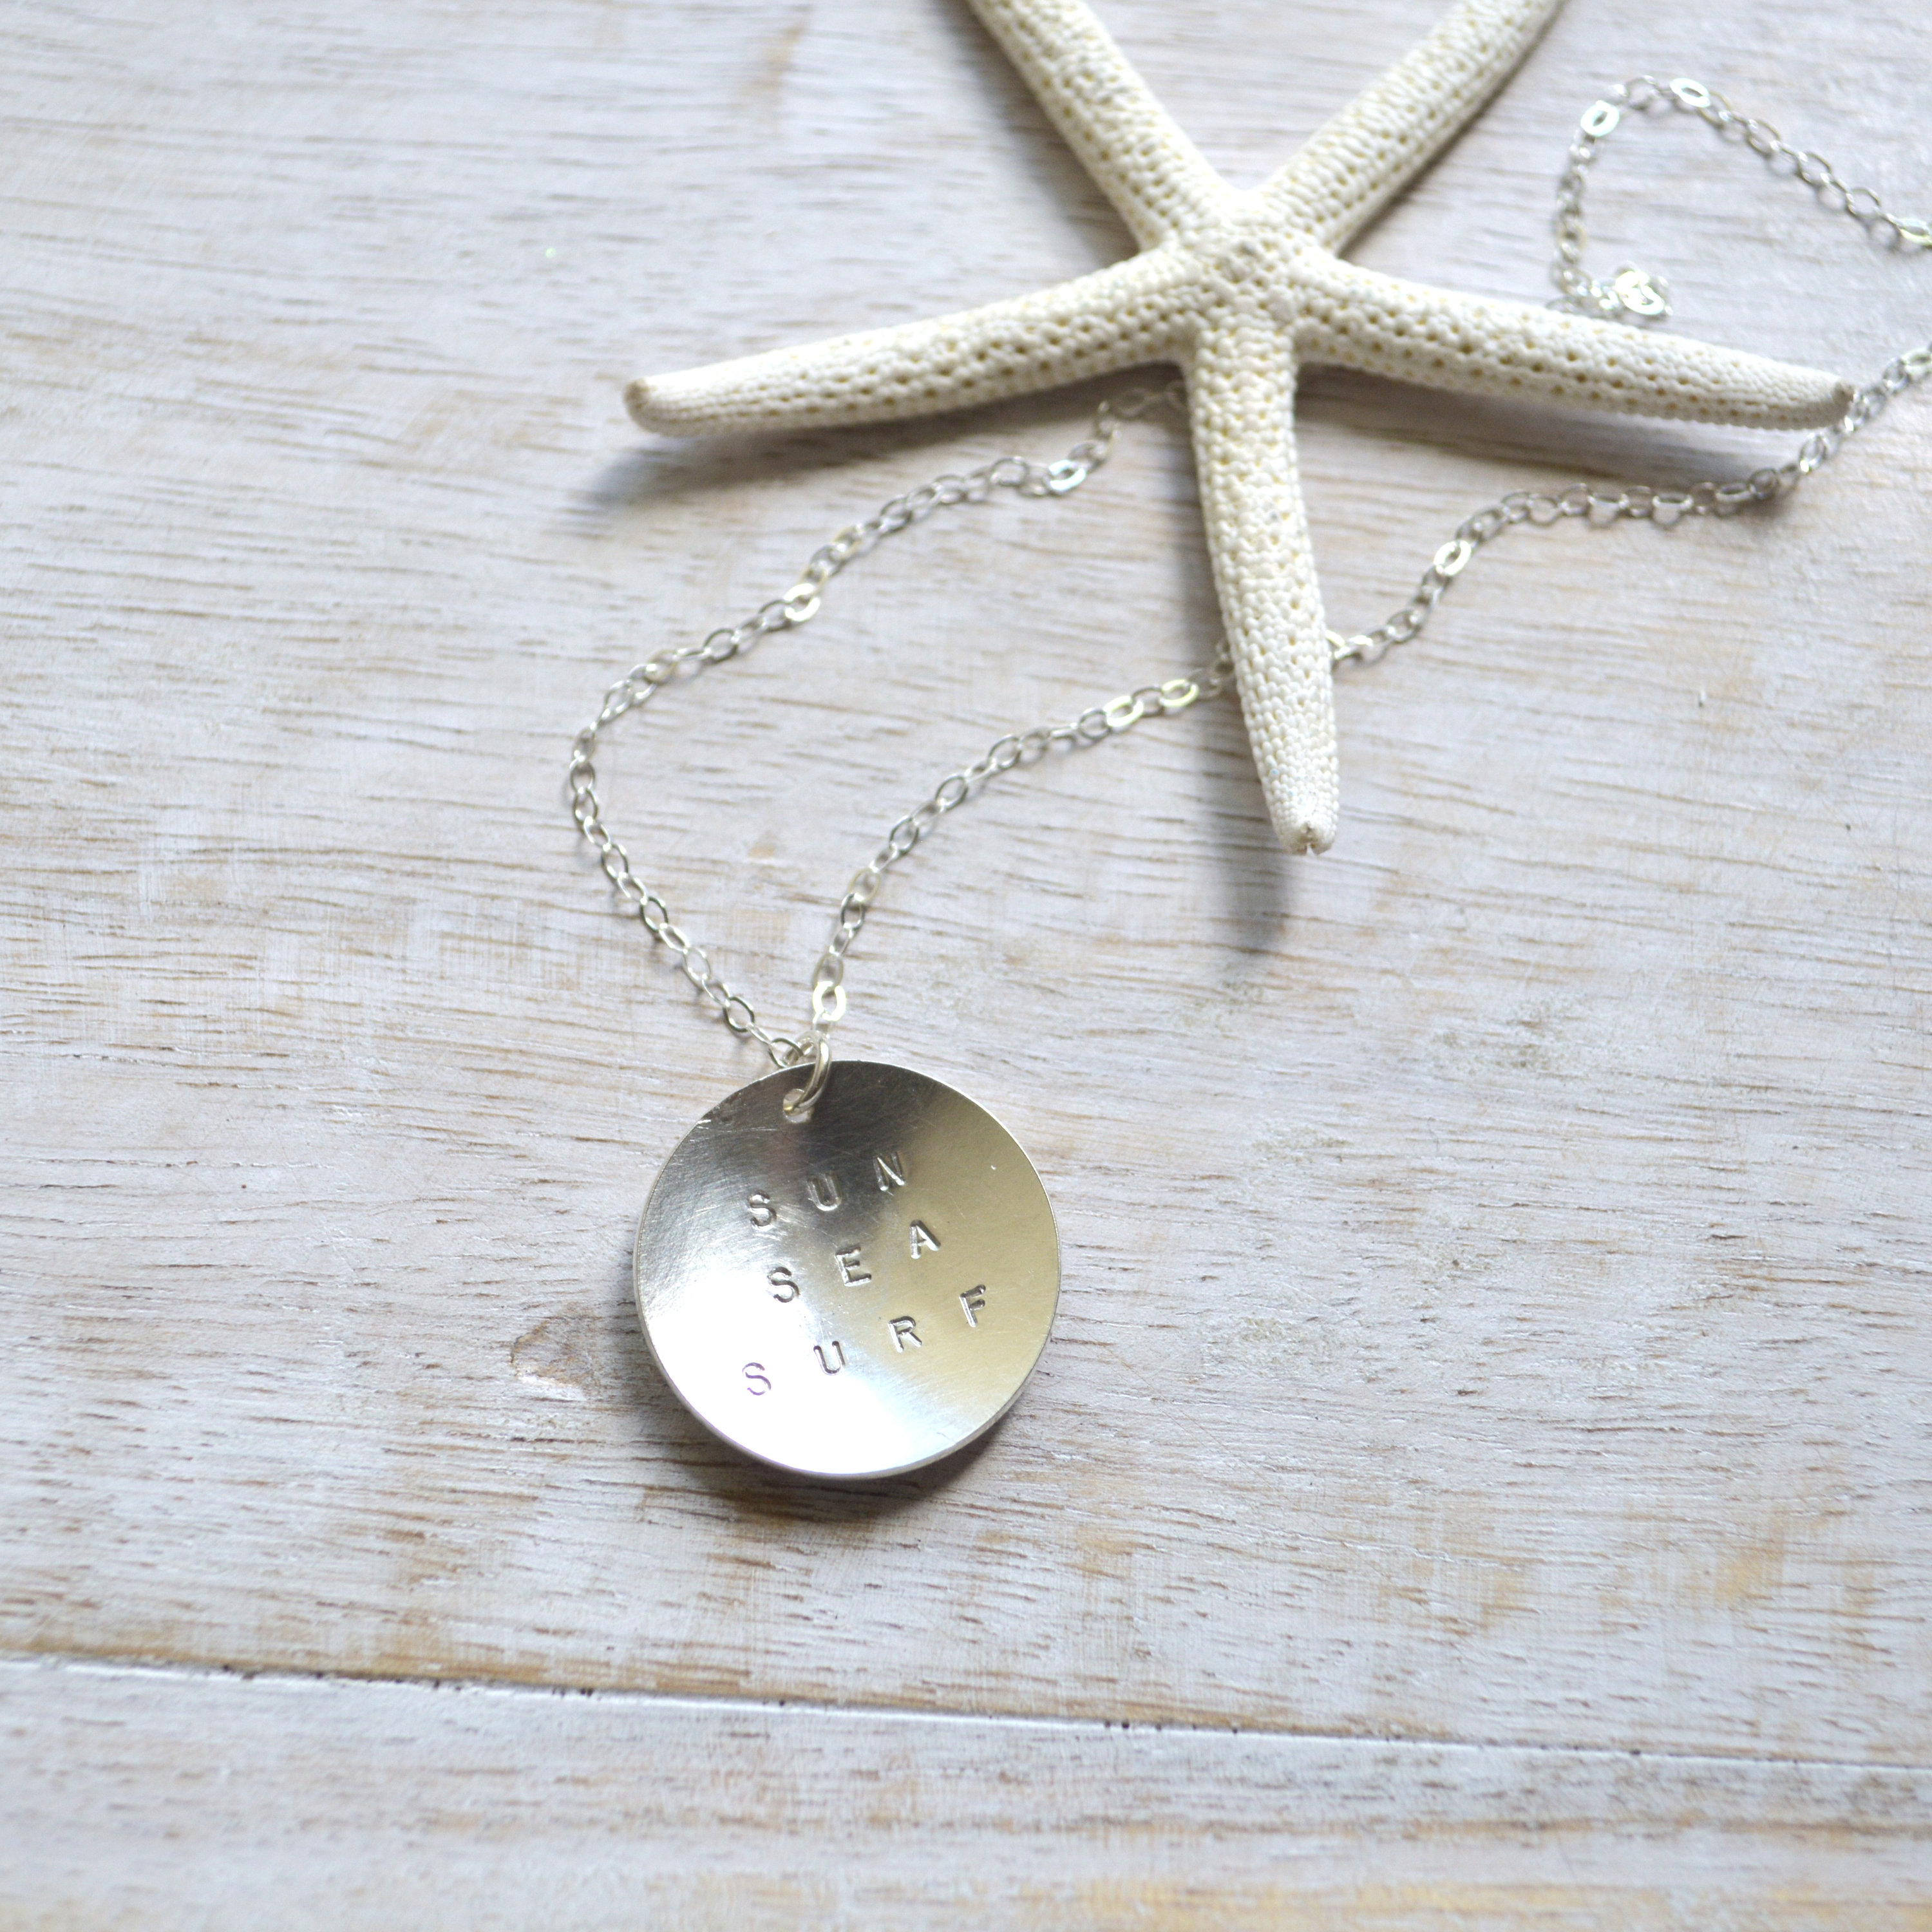 Find Your Road Necklace – Surf Sun Sea™